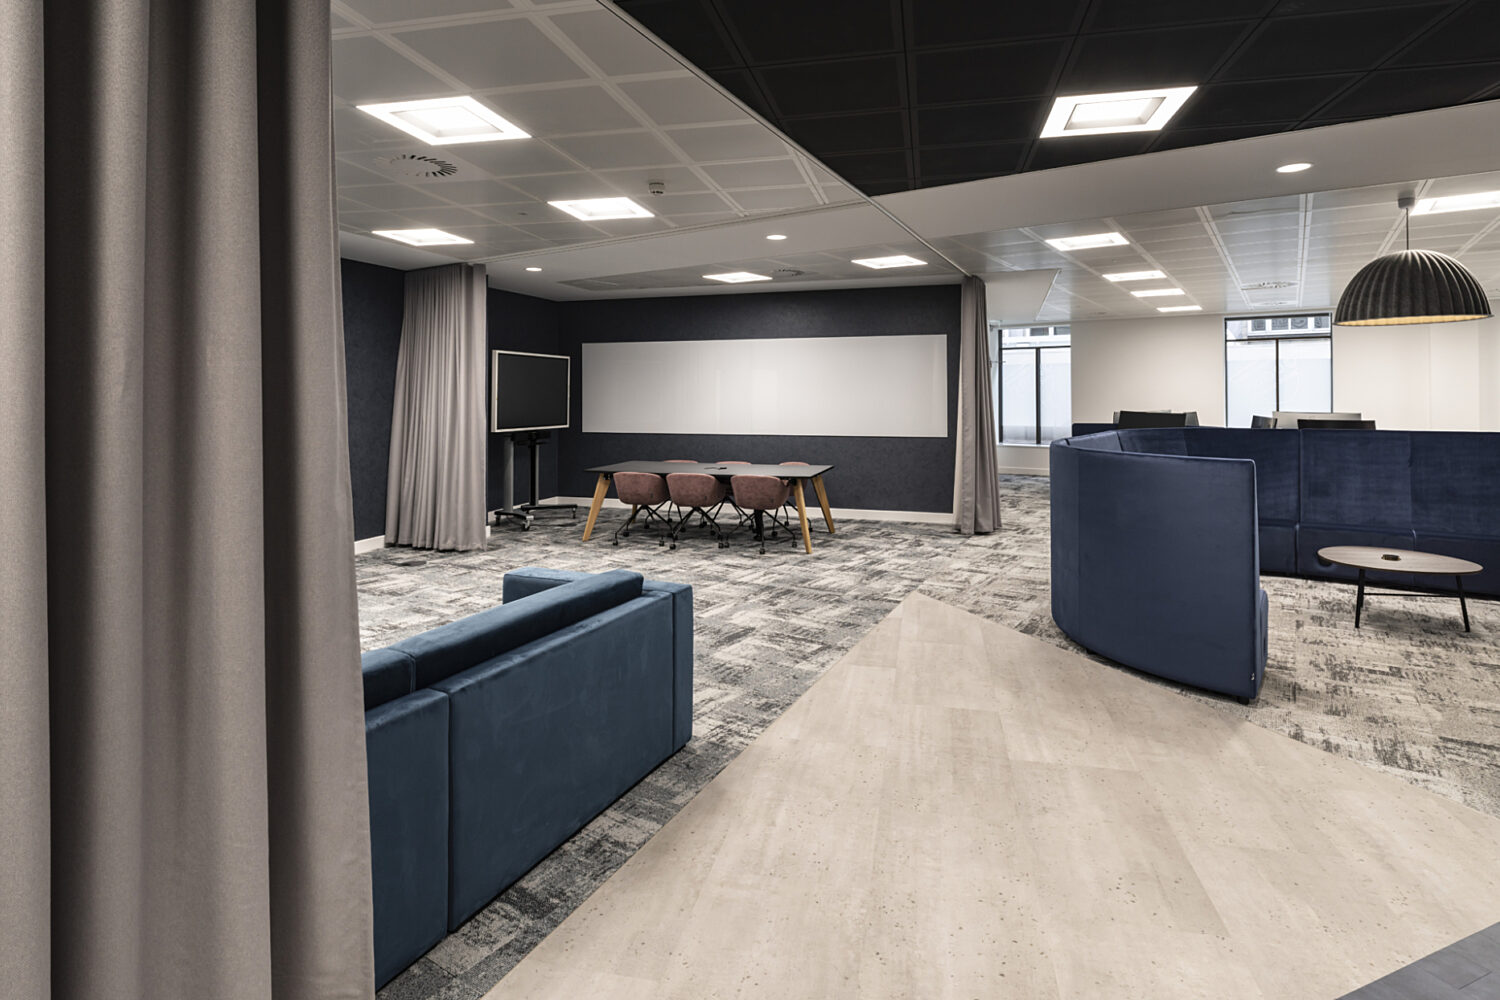 Curtains create soft divisions in Caesars Entertainments Leeds office